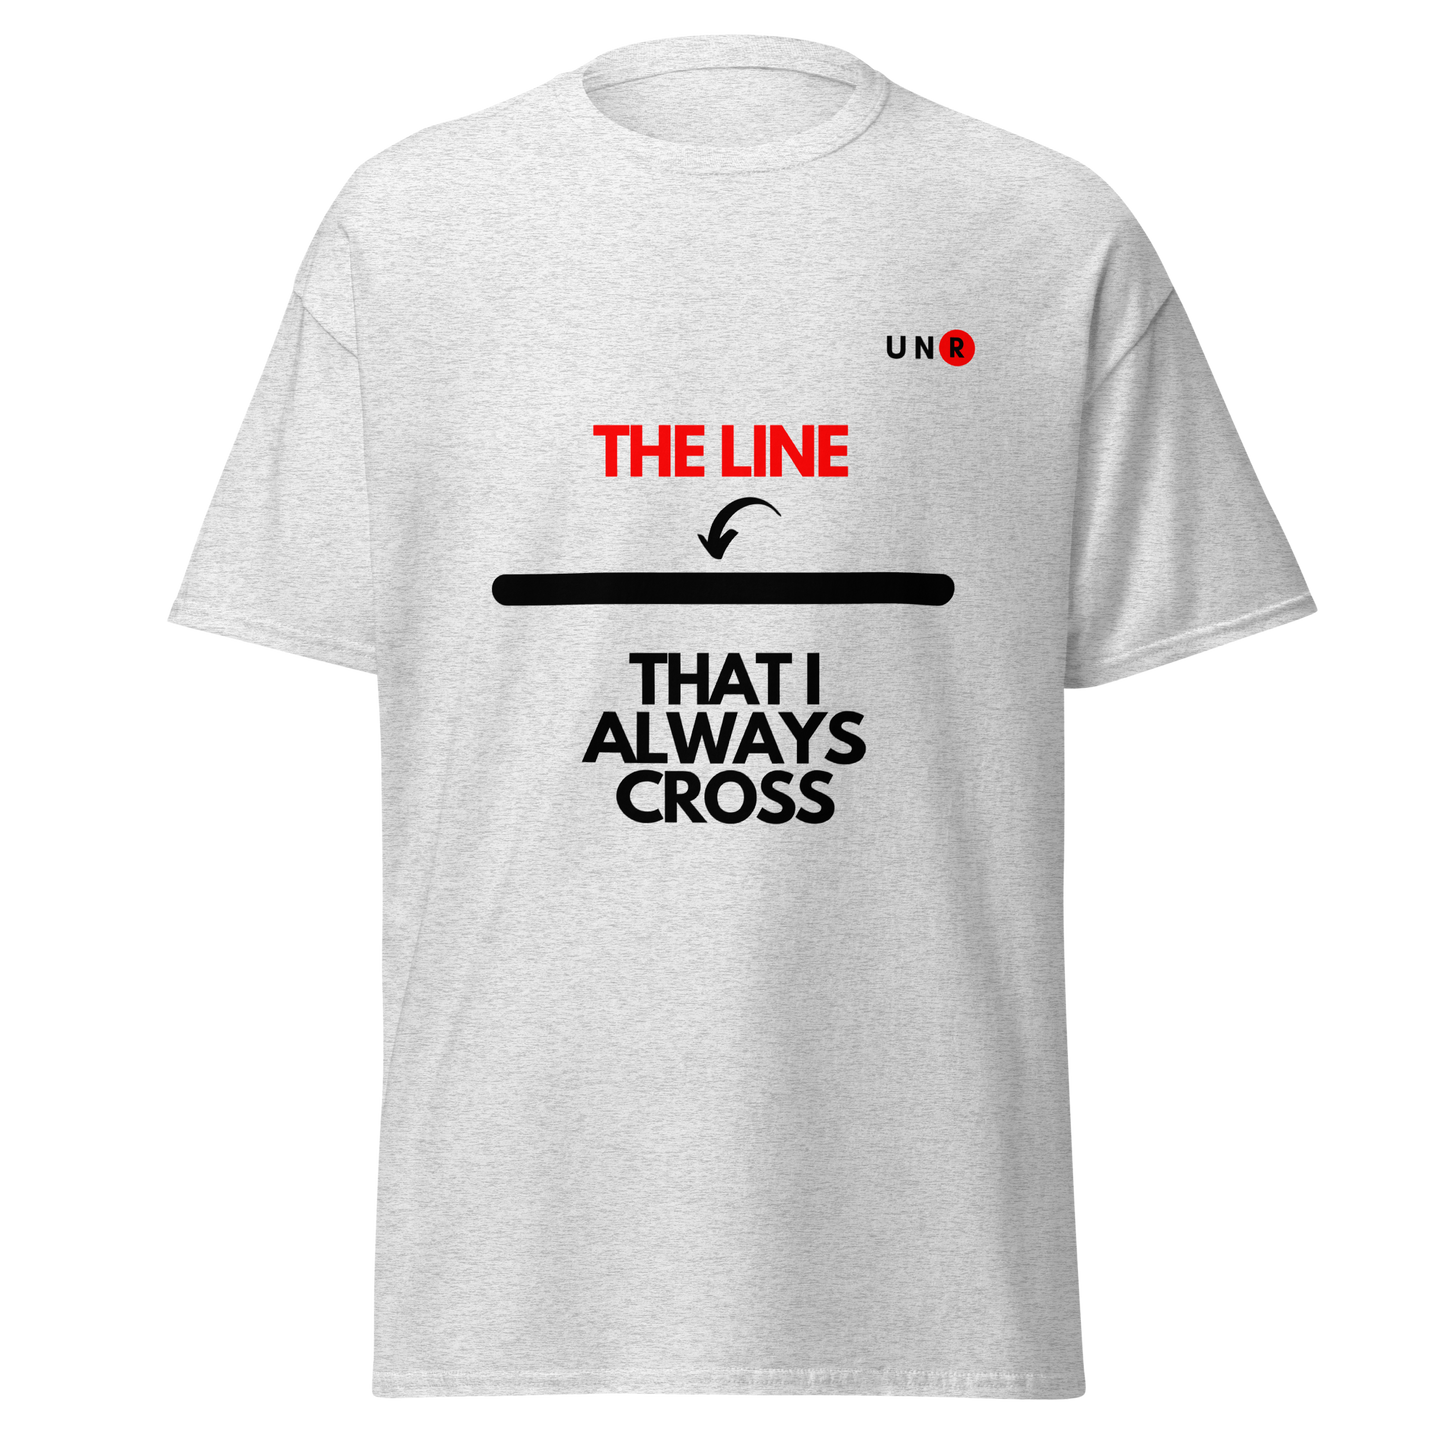 The Line That I Always Cross T-shirt